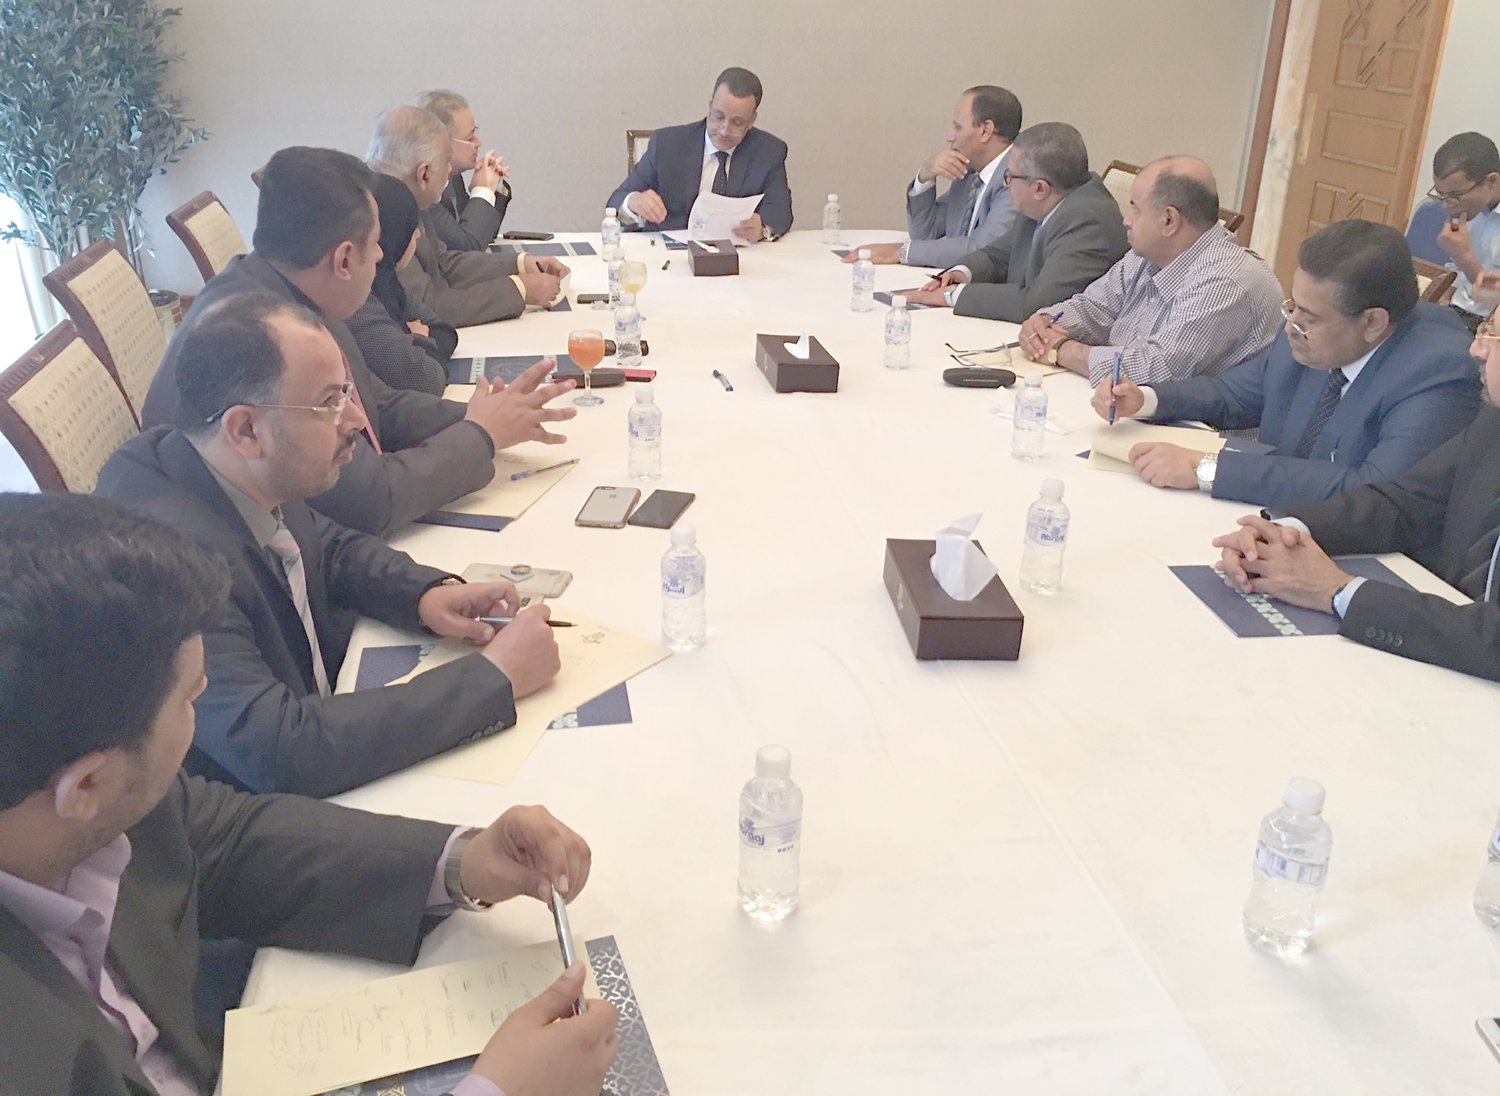 UN Secretary General's Special Envoy for Yemen Ismail Ould Cheikh Ahmad meets with the Yemeni Government delegation